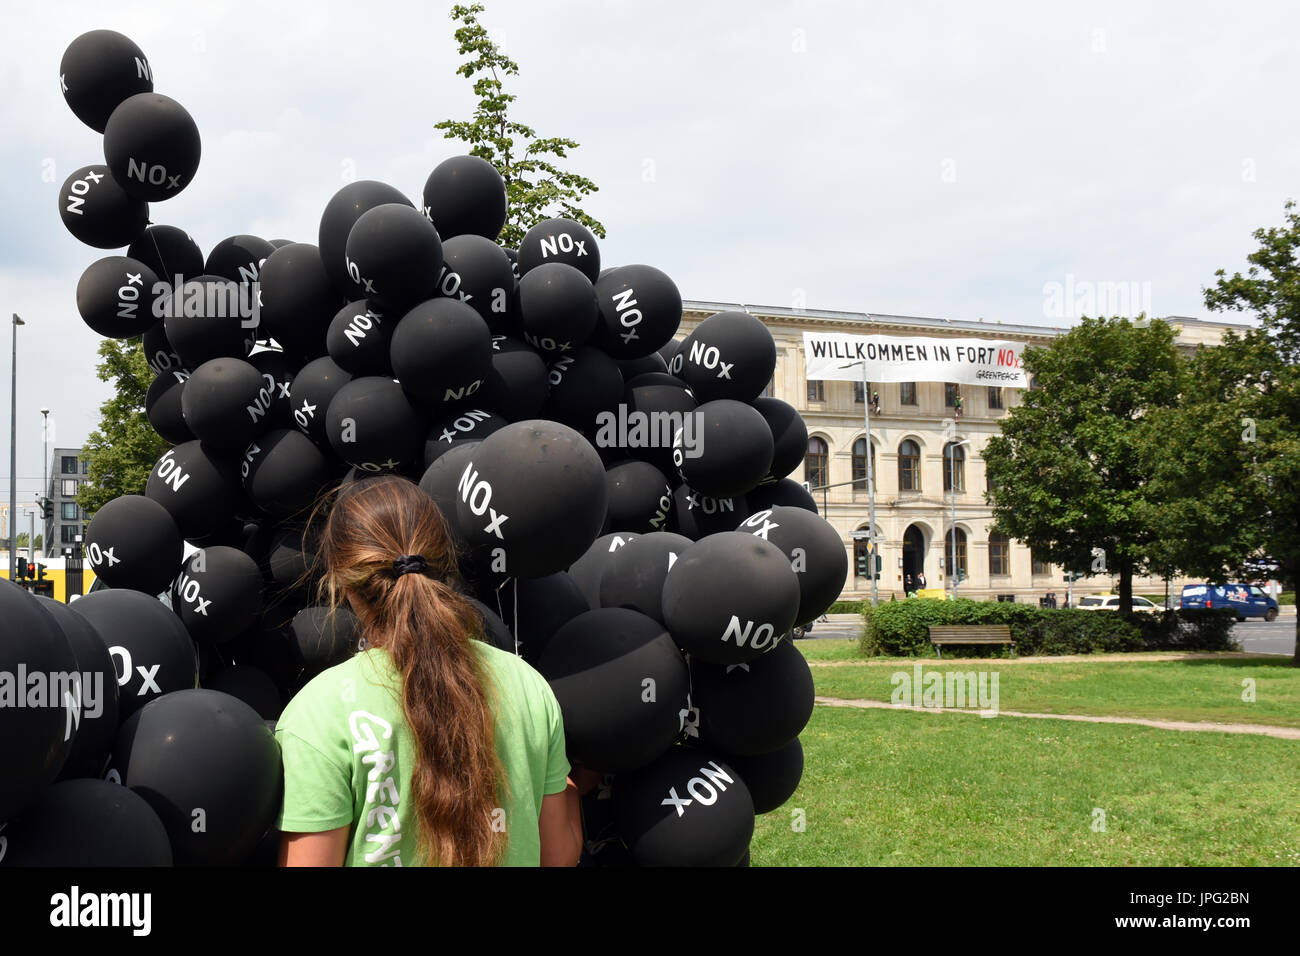 Berlin, Germany. 2nd Aug, 2017. Berlin. 2nd Aug, 2017. A Greenpeace activist protests in front of the Ministry of Transport after a summit on the reduction of diesel use on August 2, 2017 in Berlin. The abbreviation NOx on the balloons stands for nitrogen oxide, which is released in high concentration by some diesel motors. It can act as a respiratory poison. Credit: dpa picture alliance/Alamy Live News Stock Photo